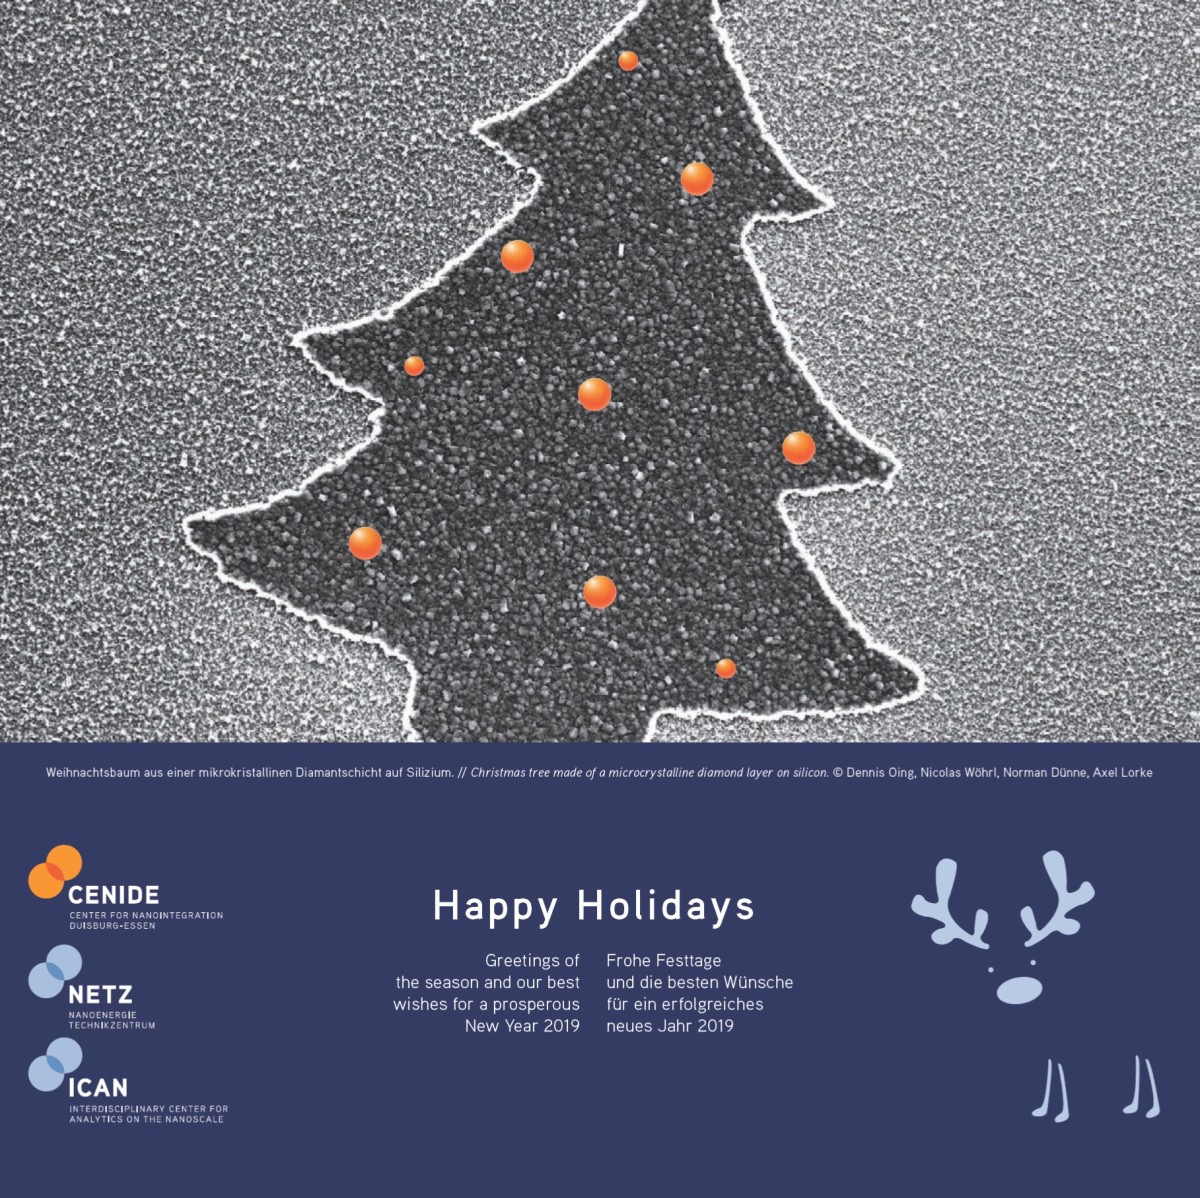 Greeting card with christmas tree made of a microcrystalline diamond layer on silicon